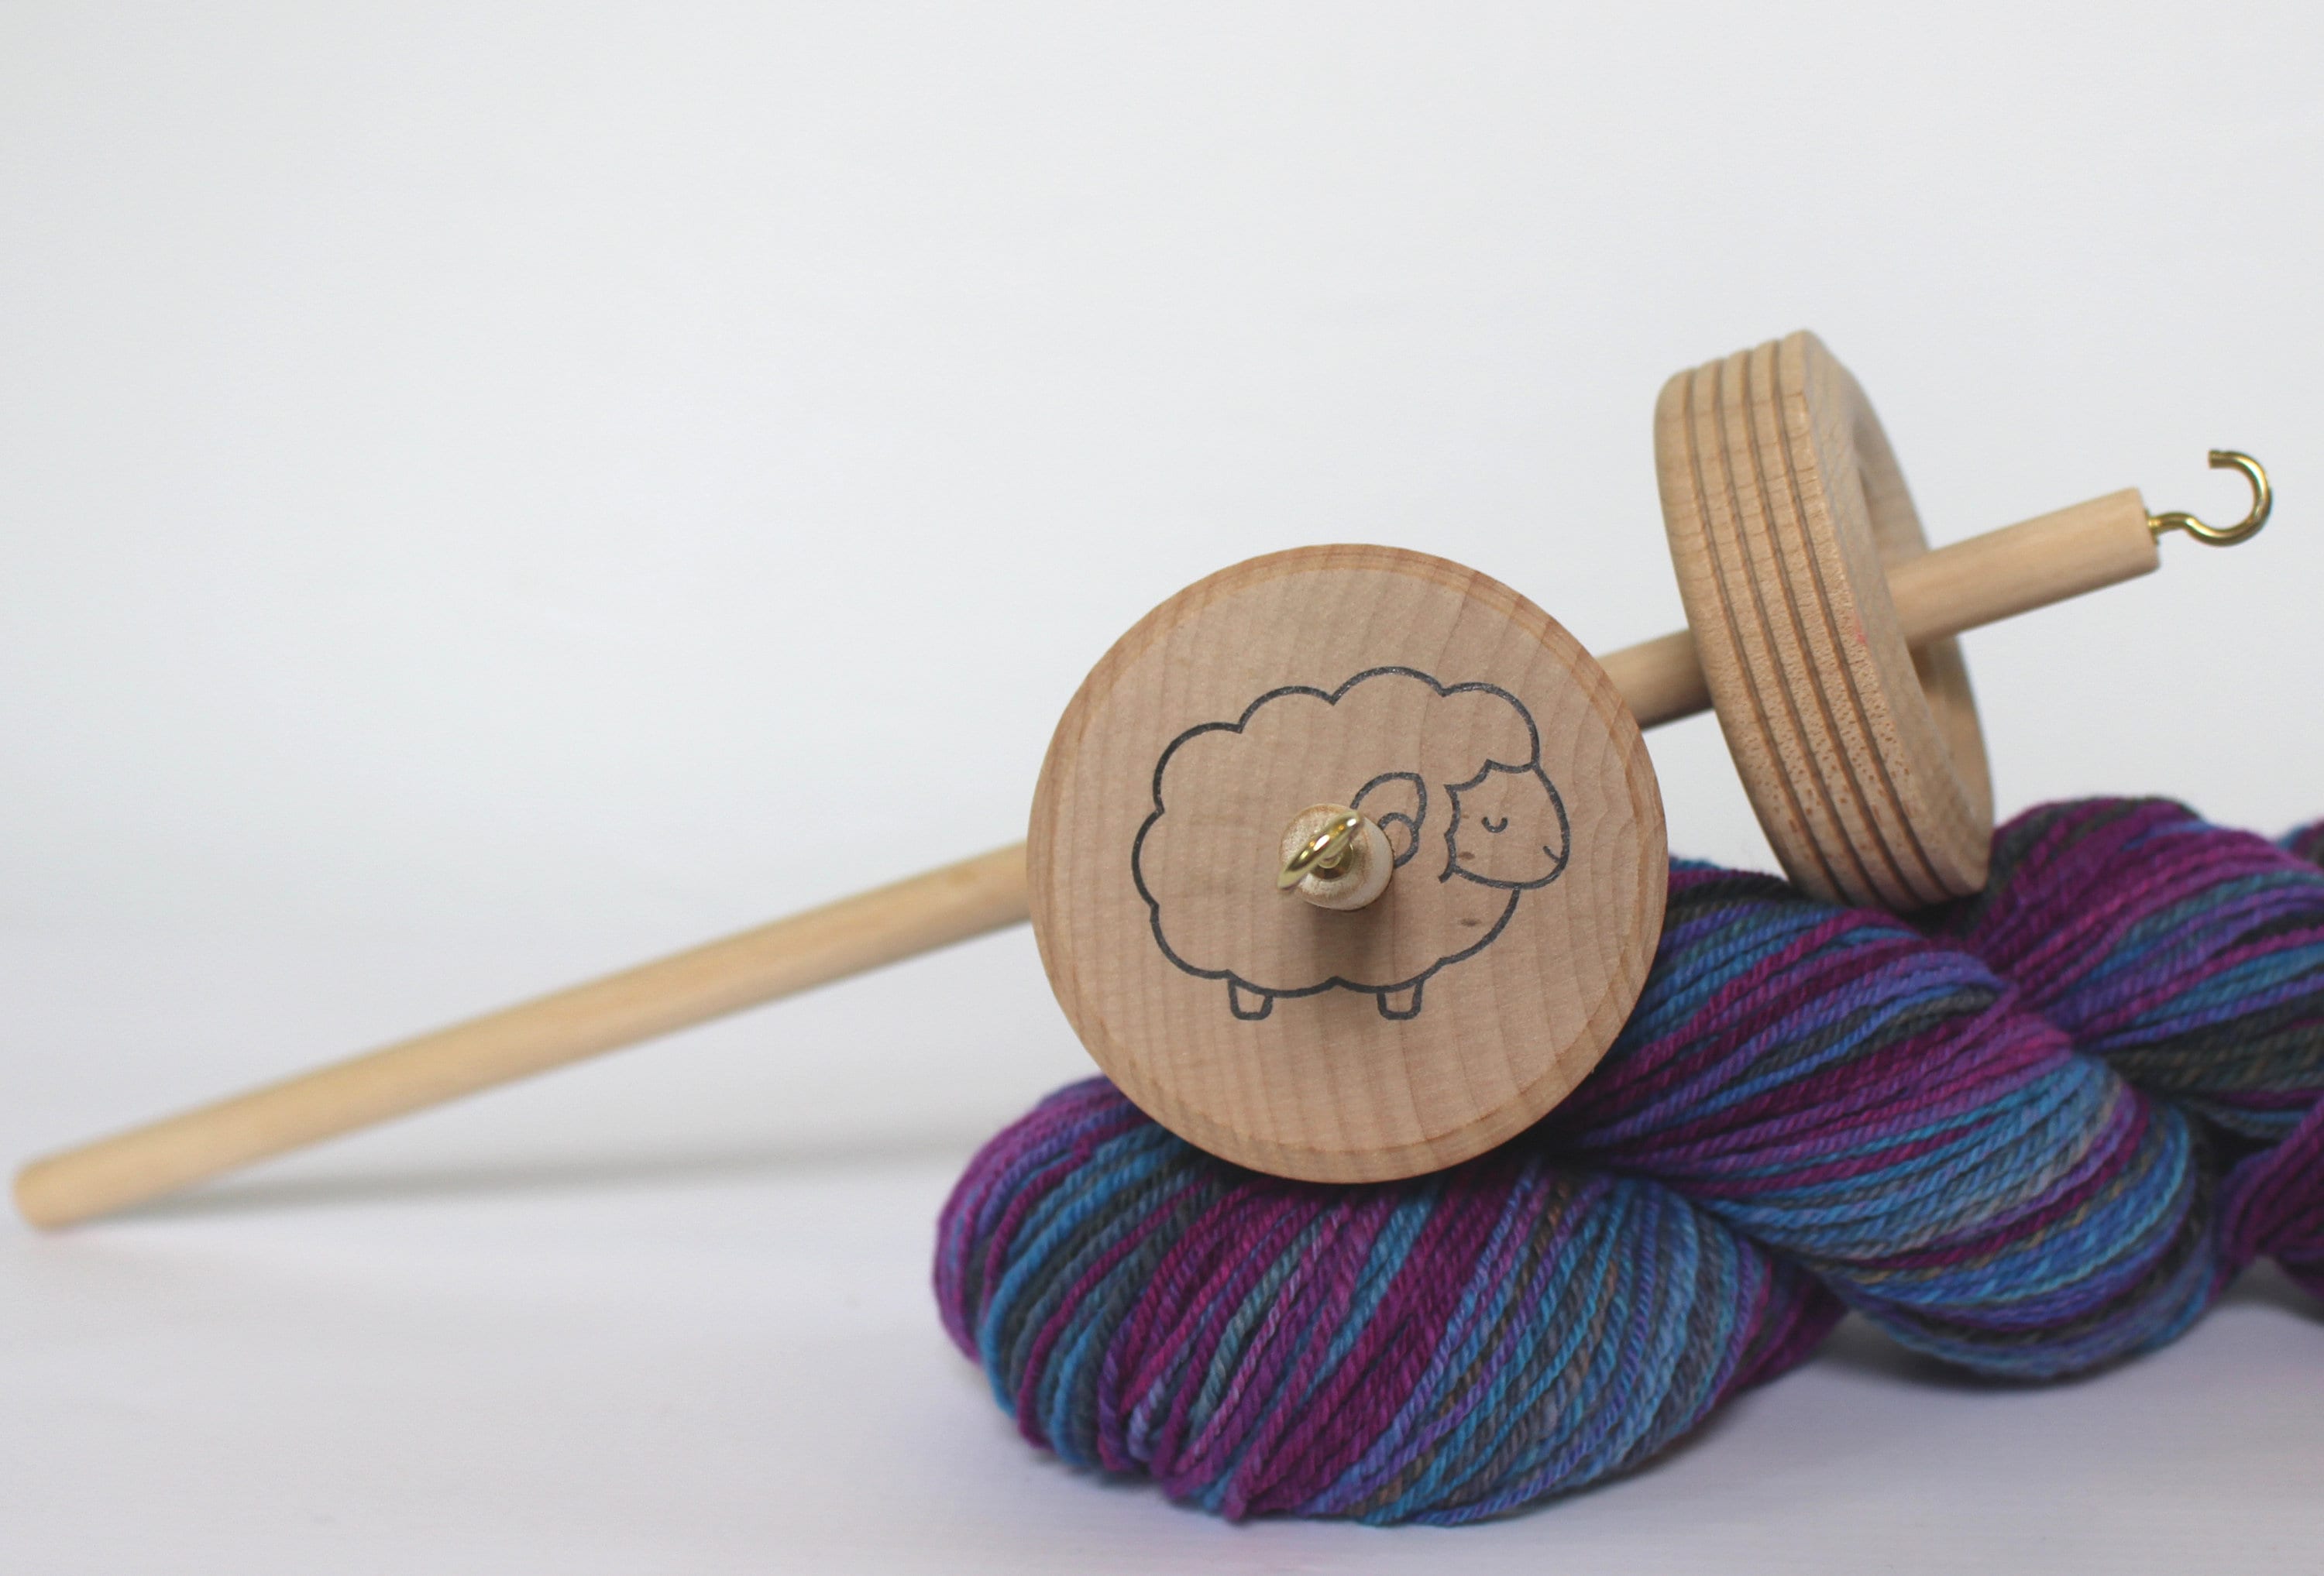 Make your own beautiful handspun yarn with a drop spindle Halcyon